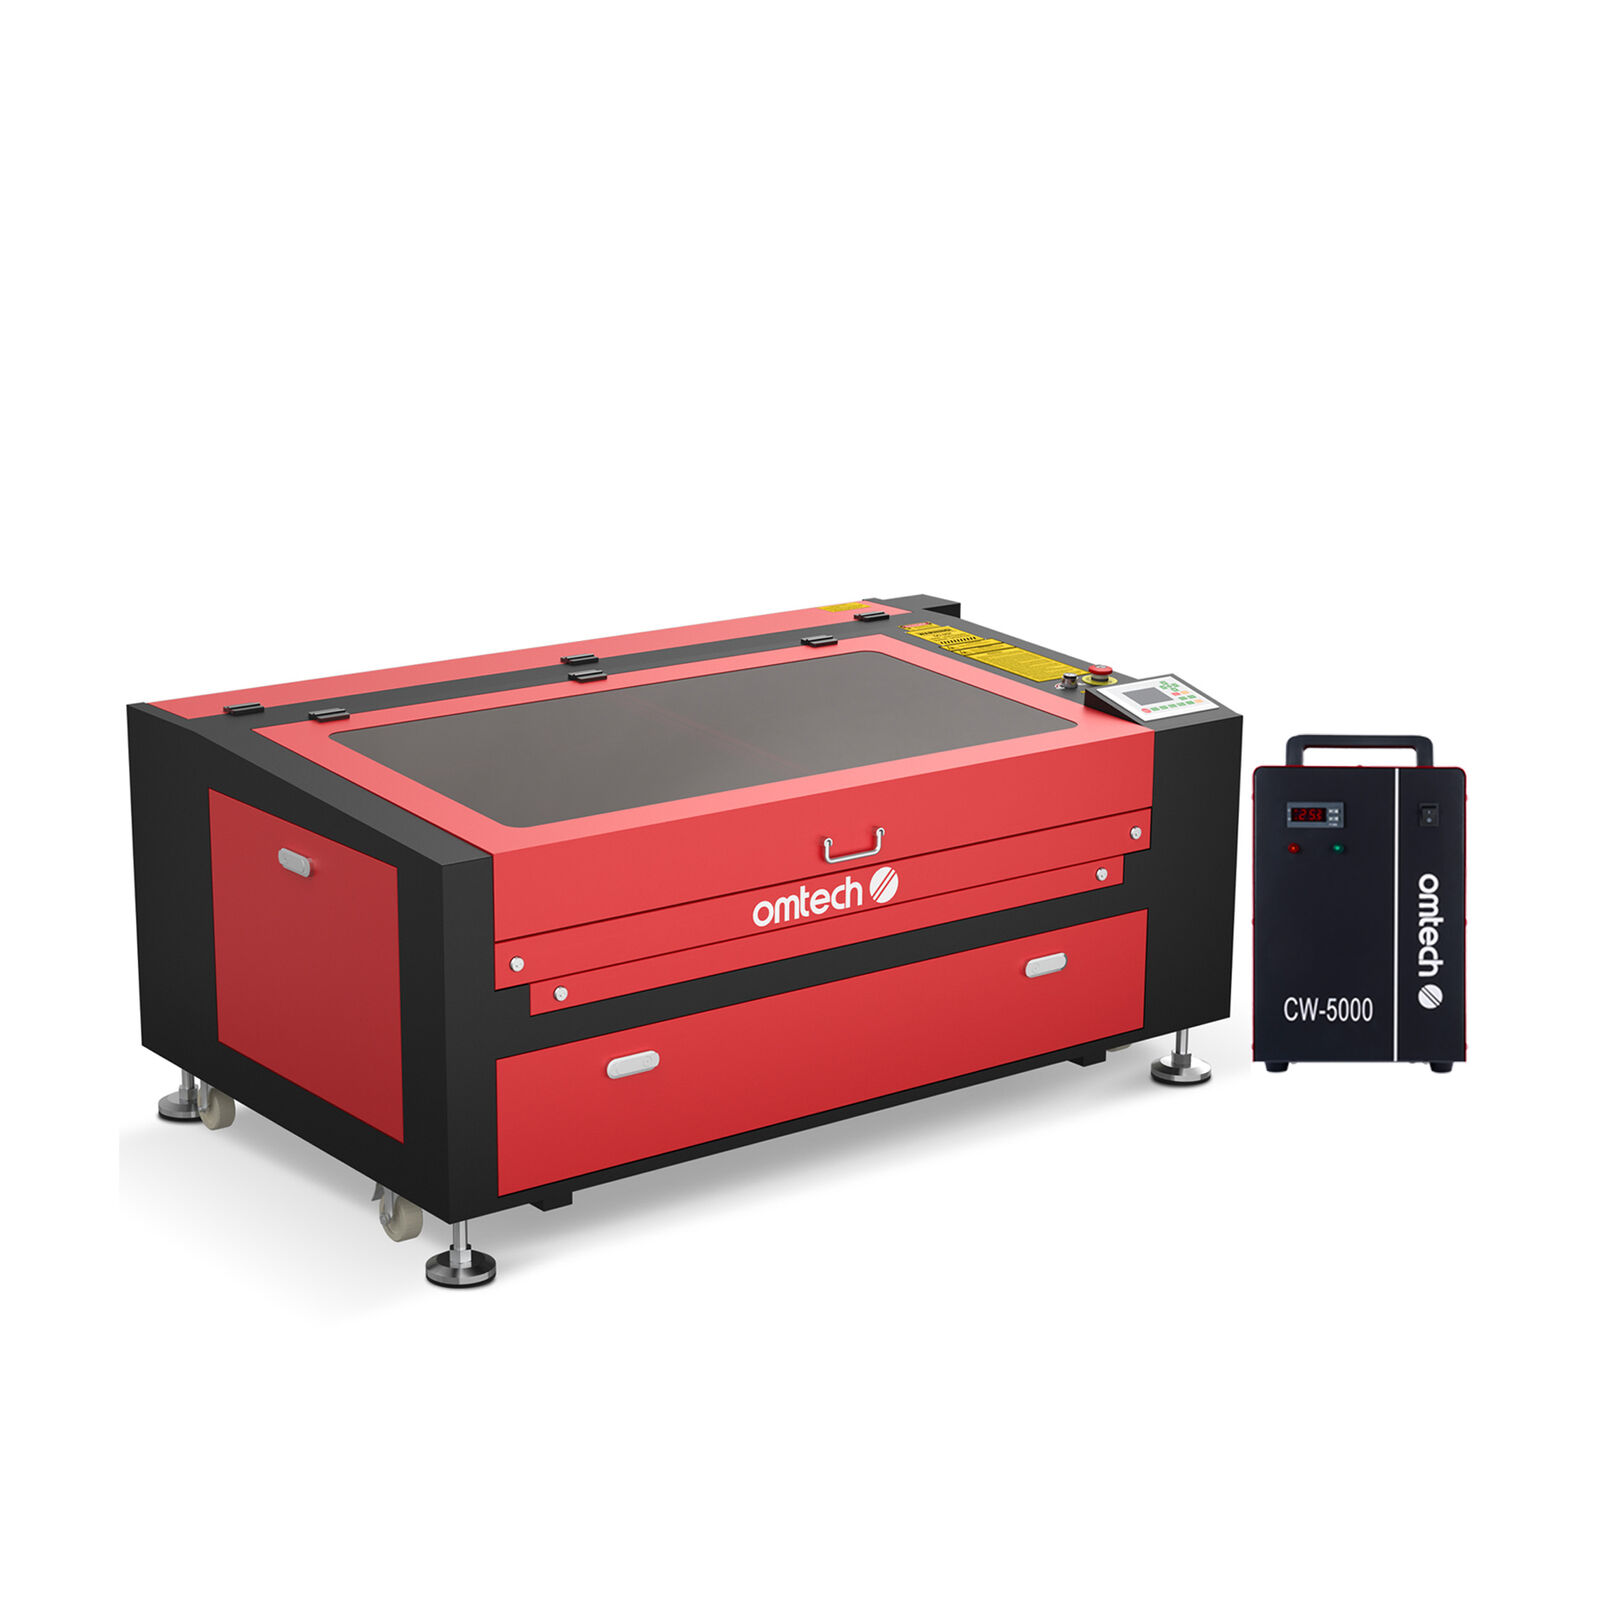 OMTech 60W 16x24in Workbed CO2 Laser Engraver Cutter Marker with Water Chiller